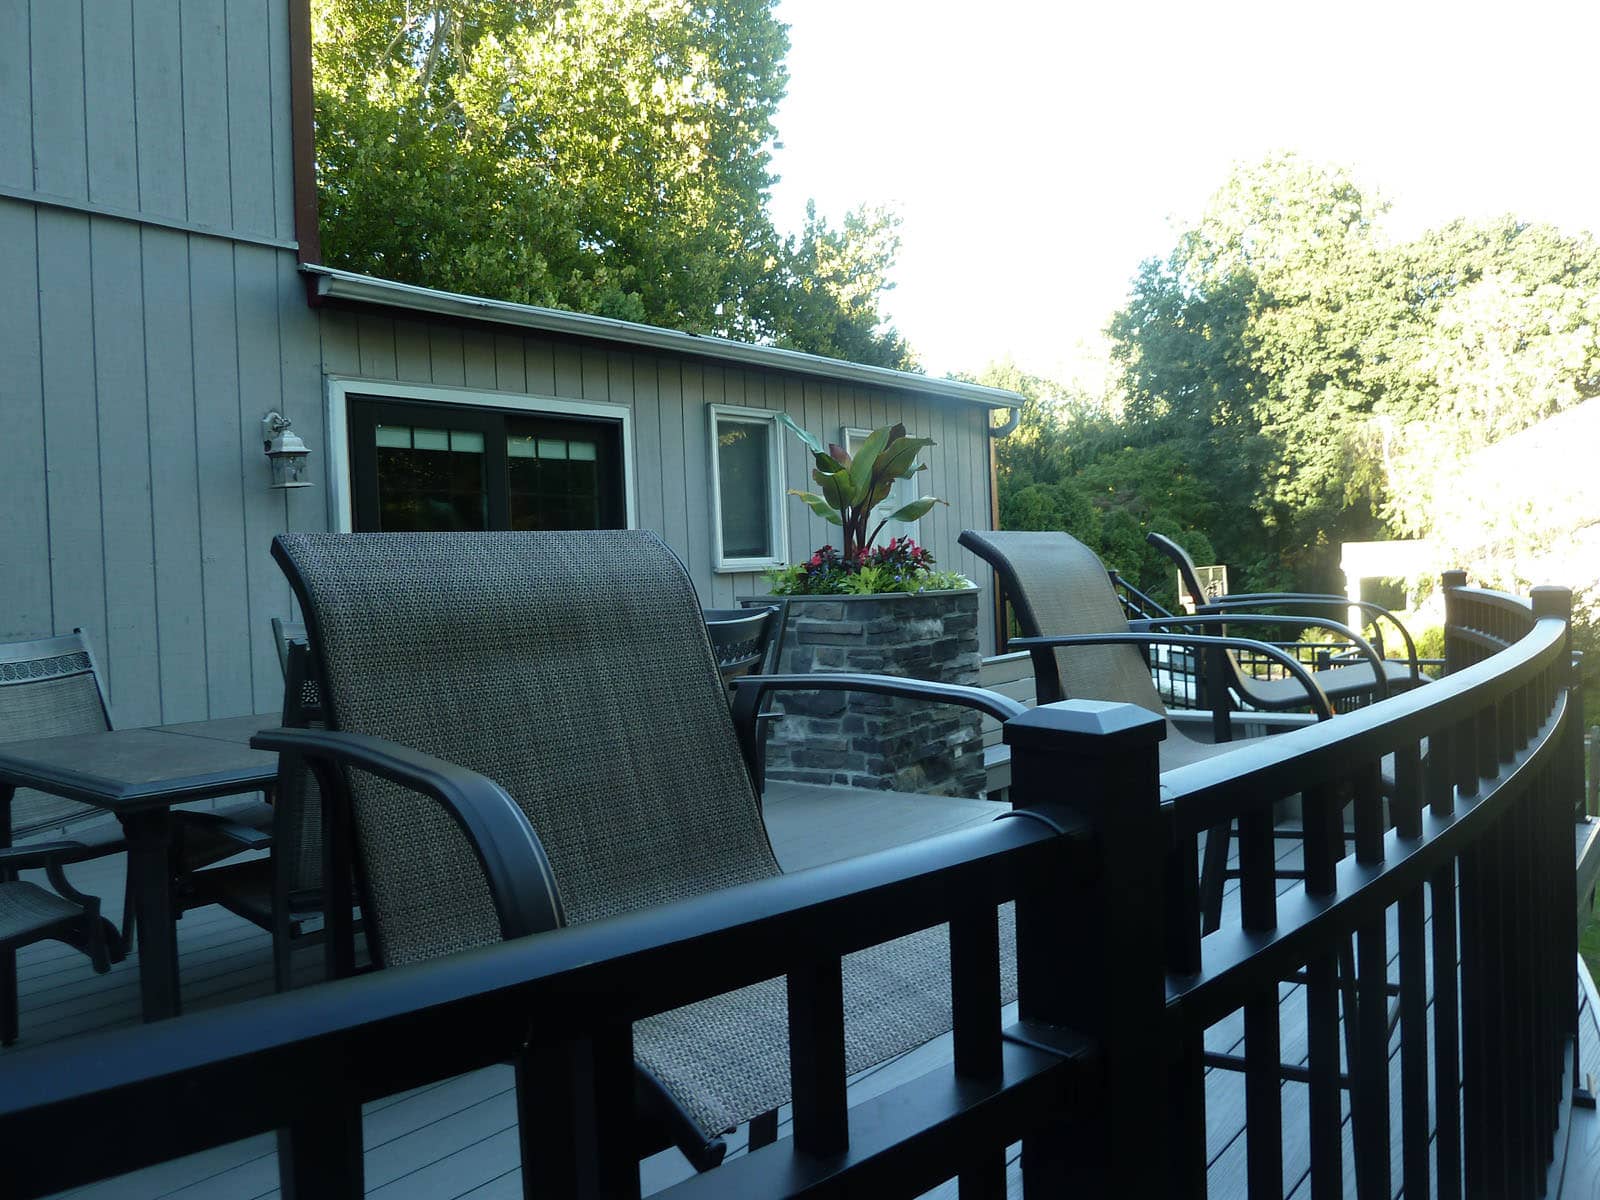 We designed and installed a custom curve to this deck to give the space much appreciated visual interest.